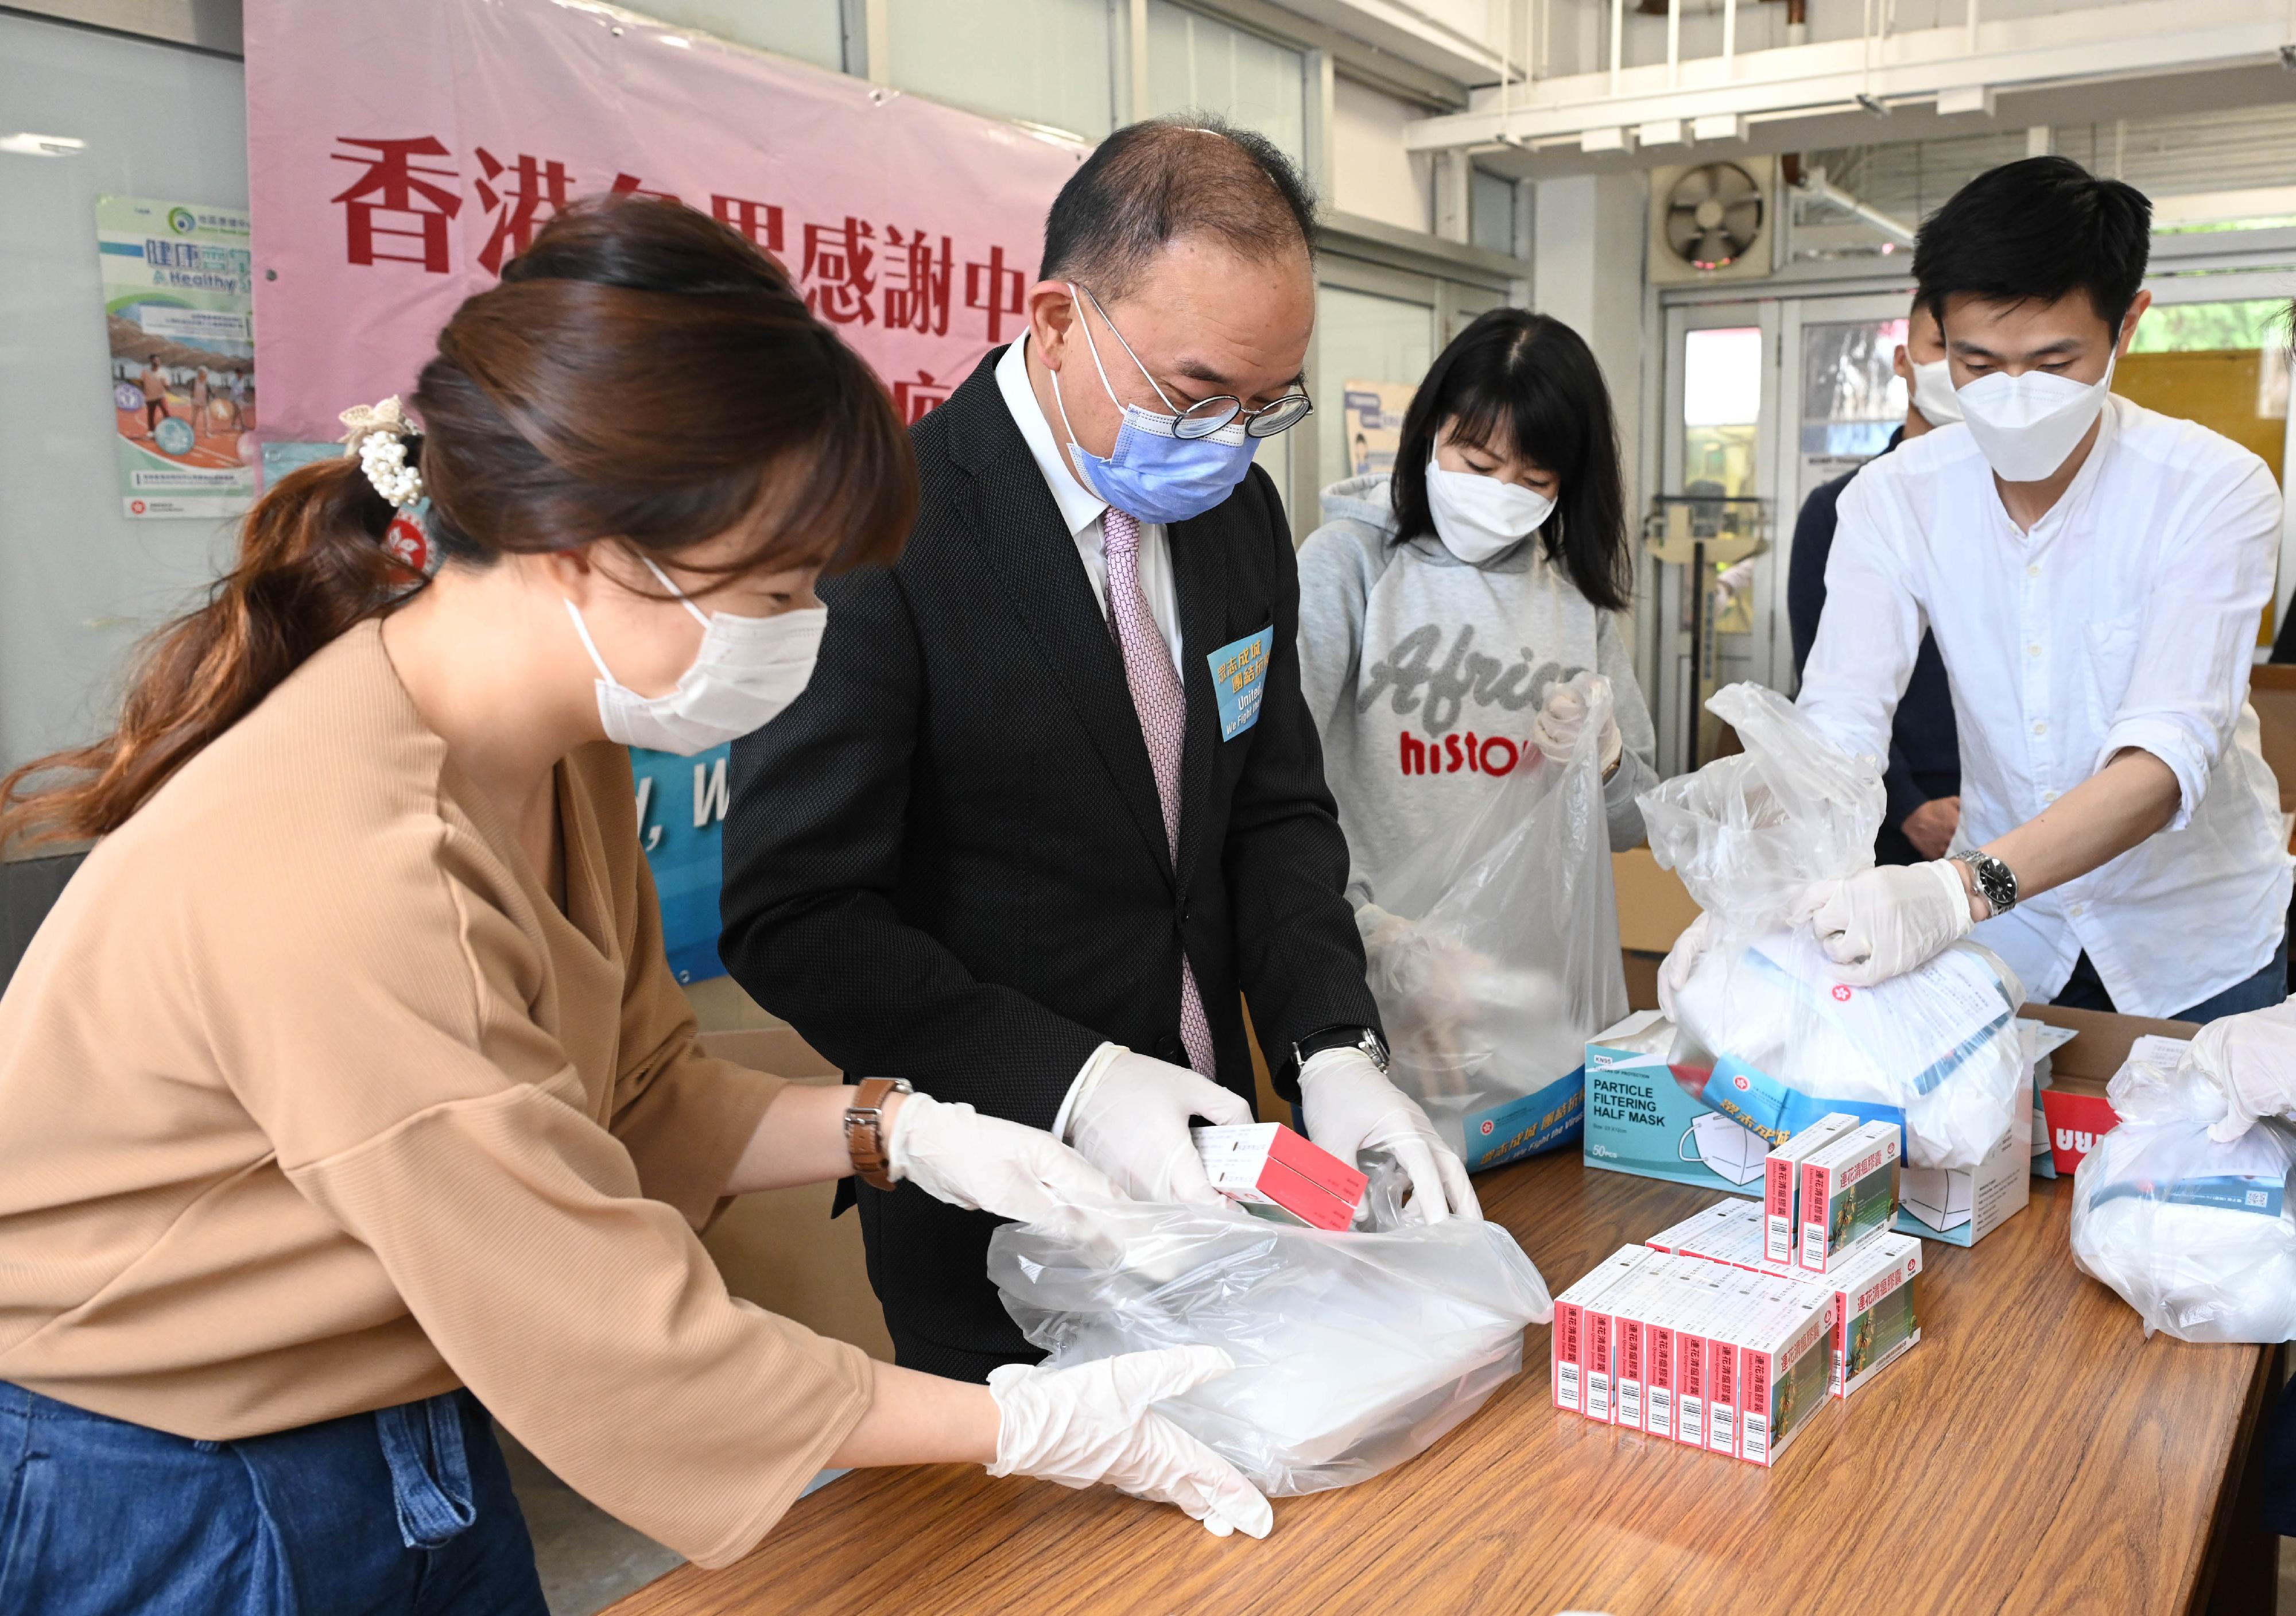 The Secretary for Constitutional and Mainland Affairs, Mr Erick Tsang Kwok-wai (second left), today (March 30) visited the anti-epidemic service bag packaging centre located at Ho Lap College (sponsored by Sik Sik Yuen) in Wong Tai Sin to show his support for colleagues and participate in the packaging work.